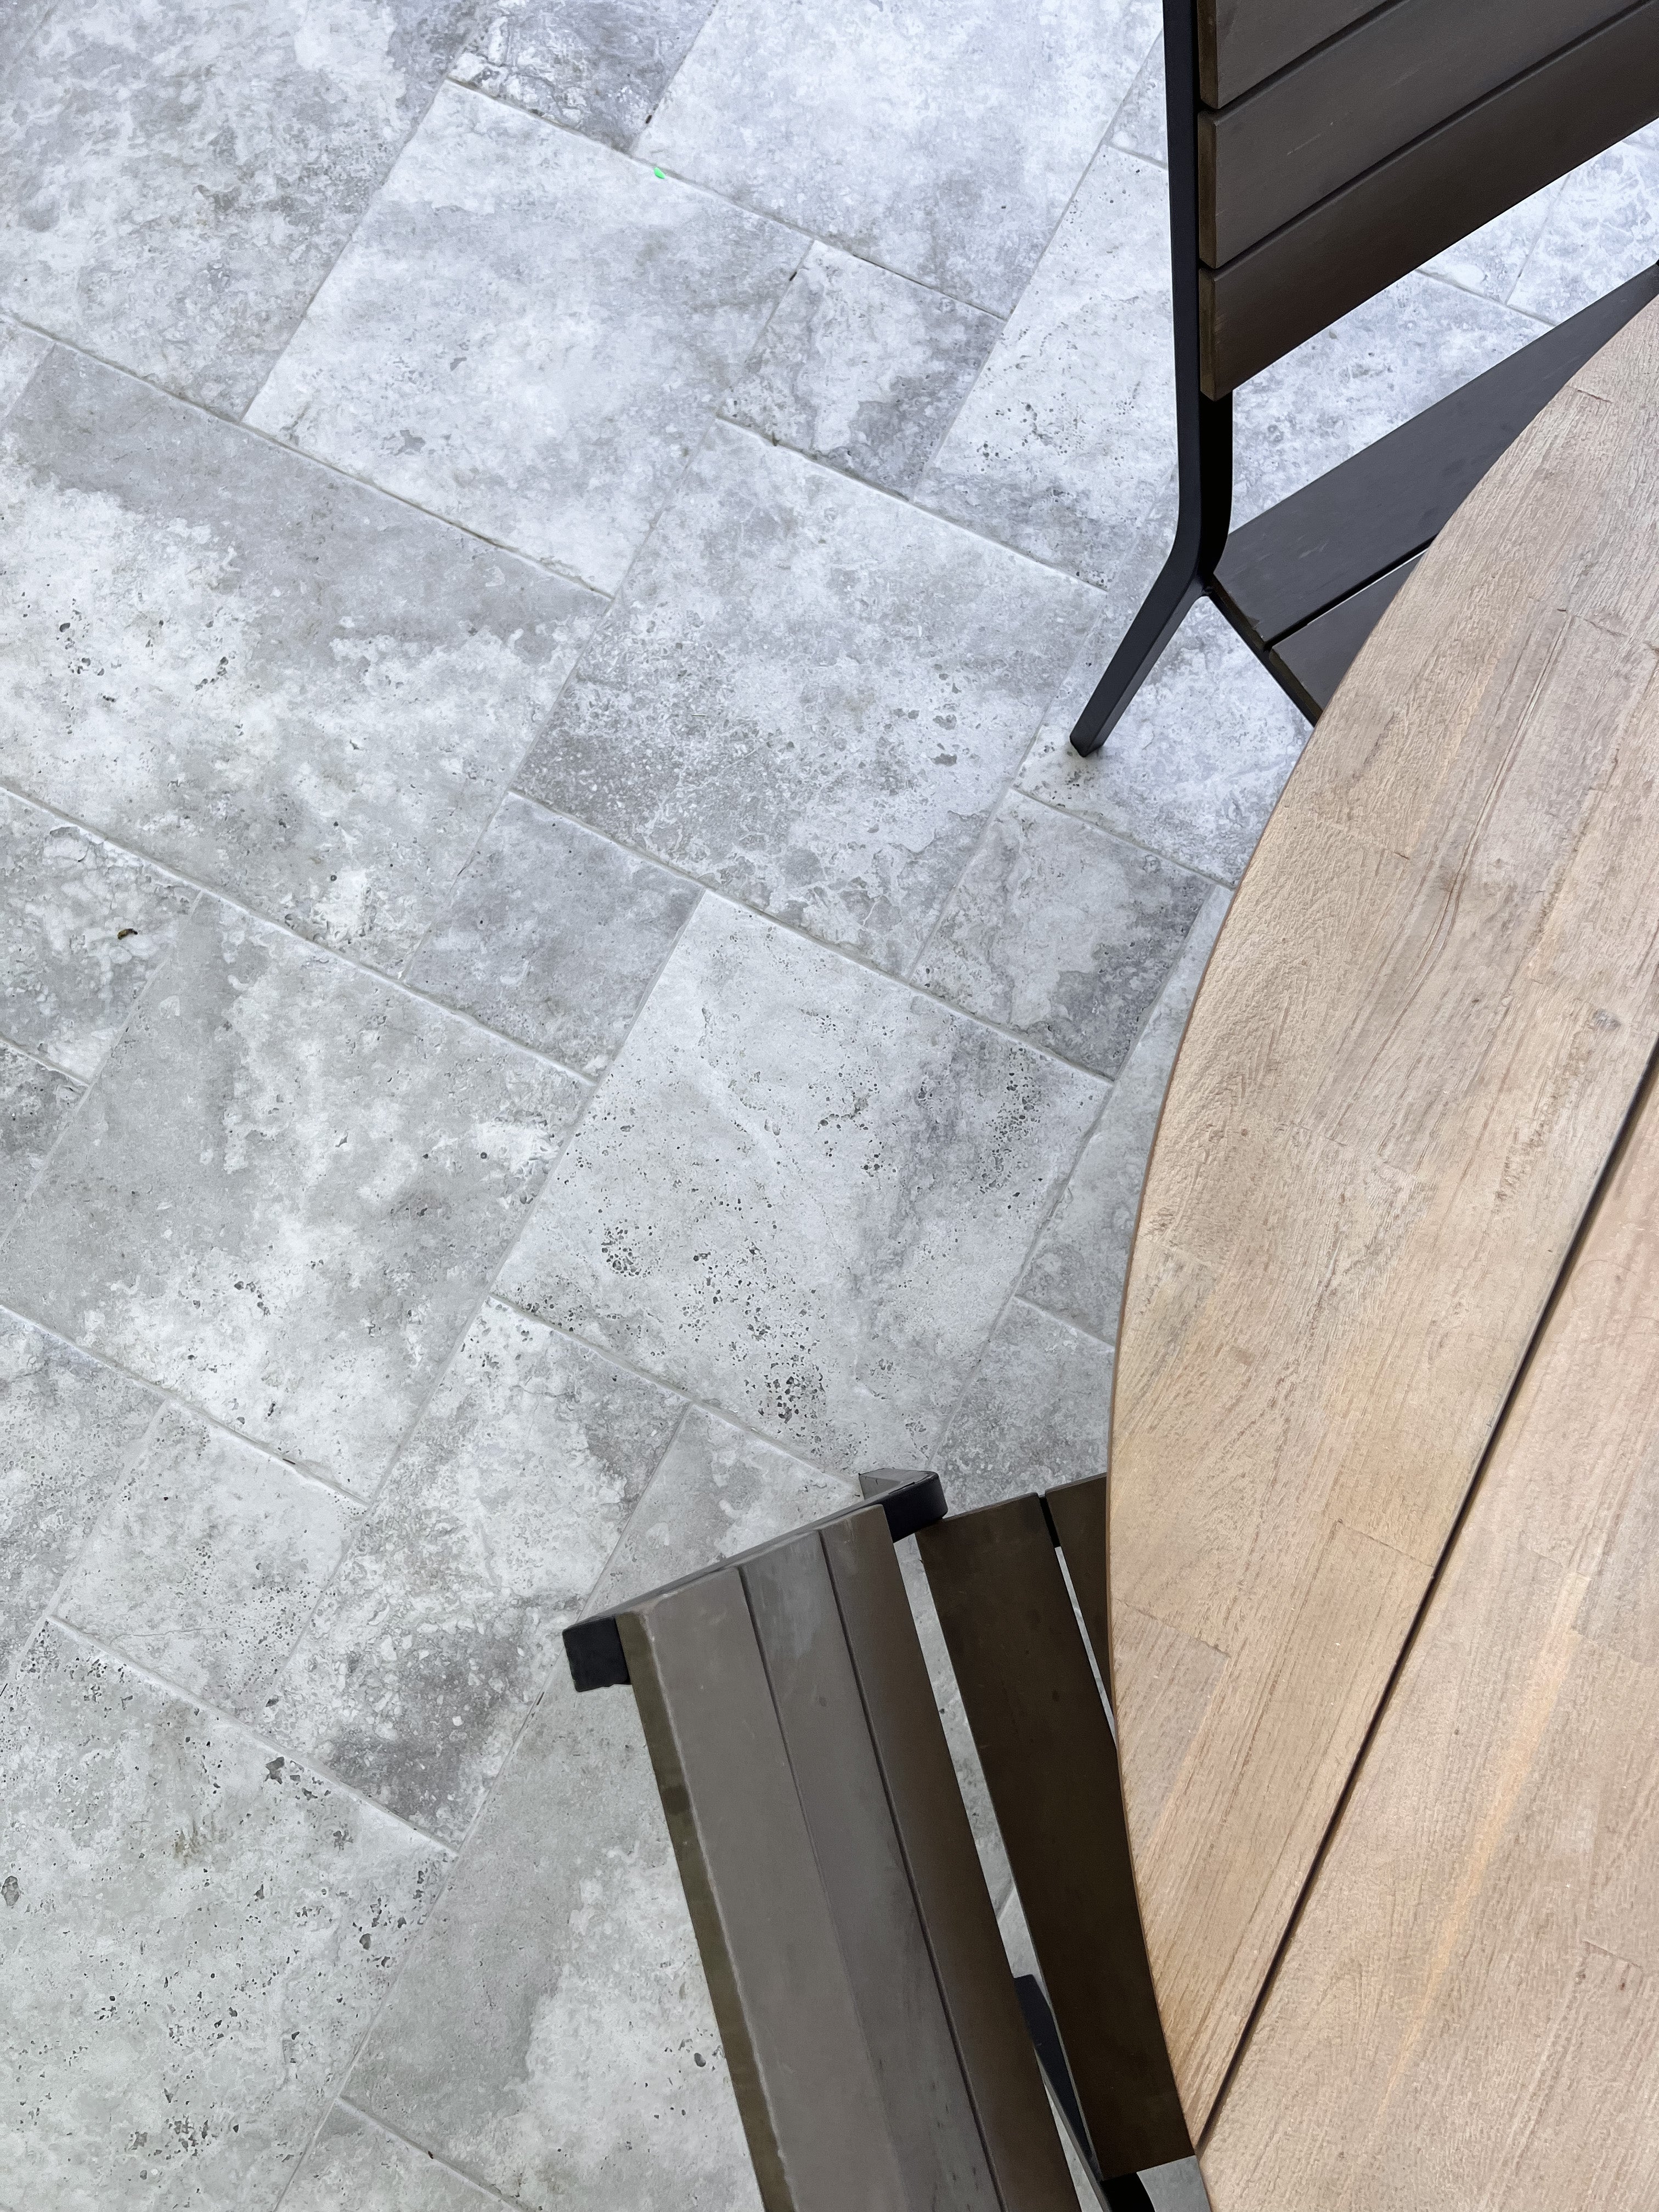 The Future is Underfoot — Benefits of Using Tiles for Home Flooring